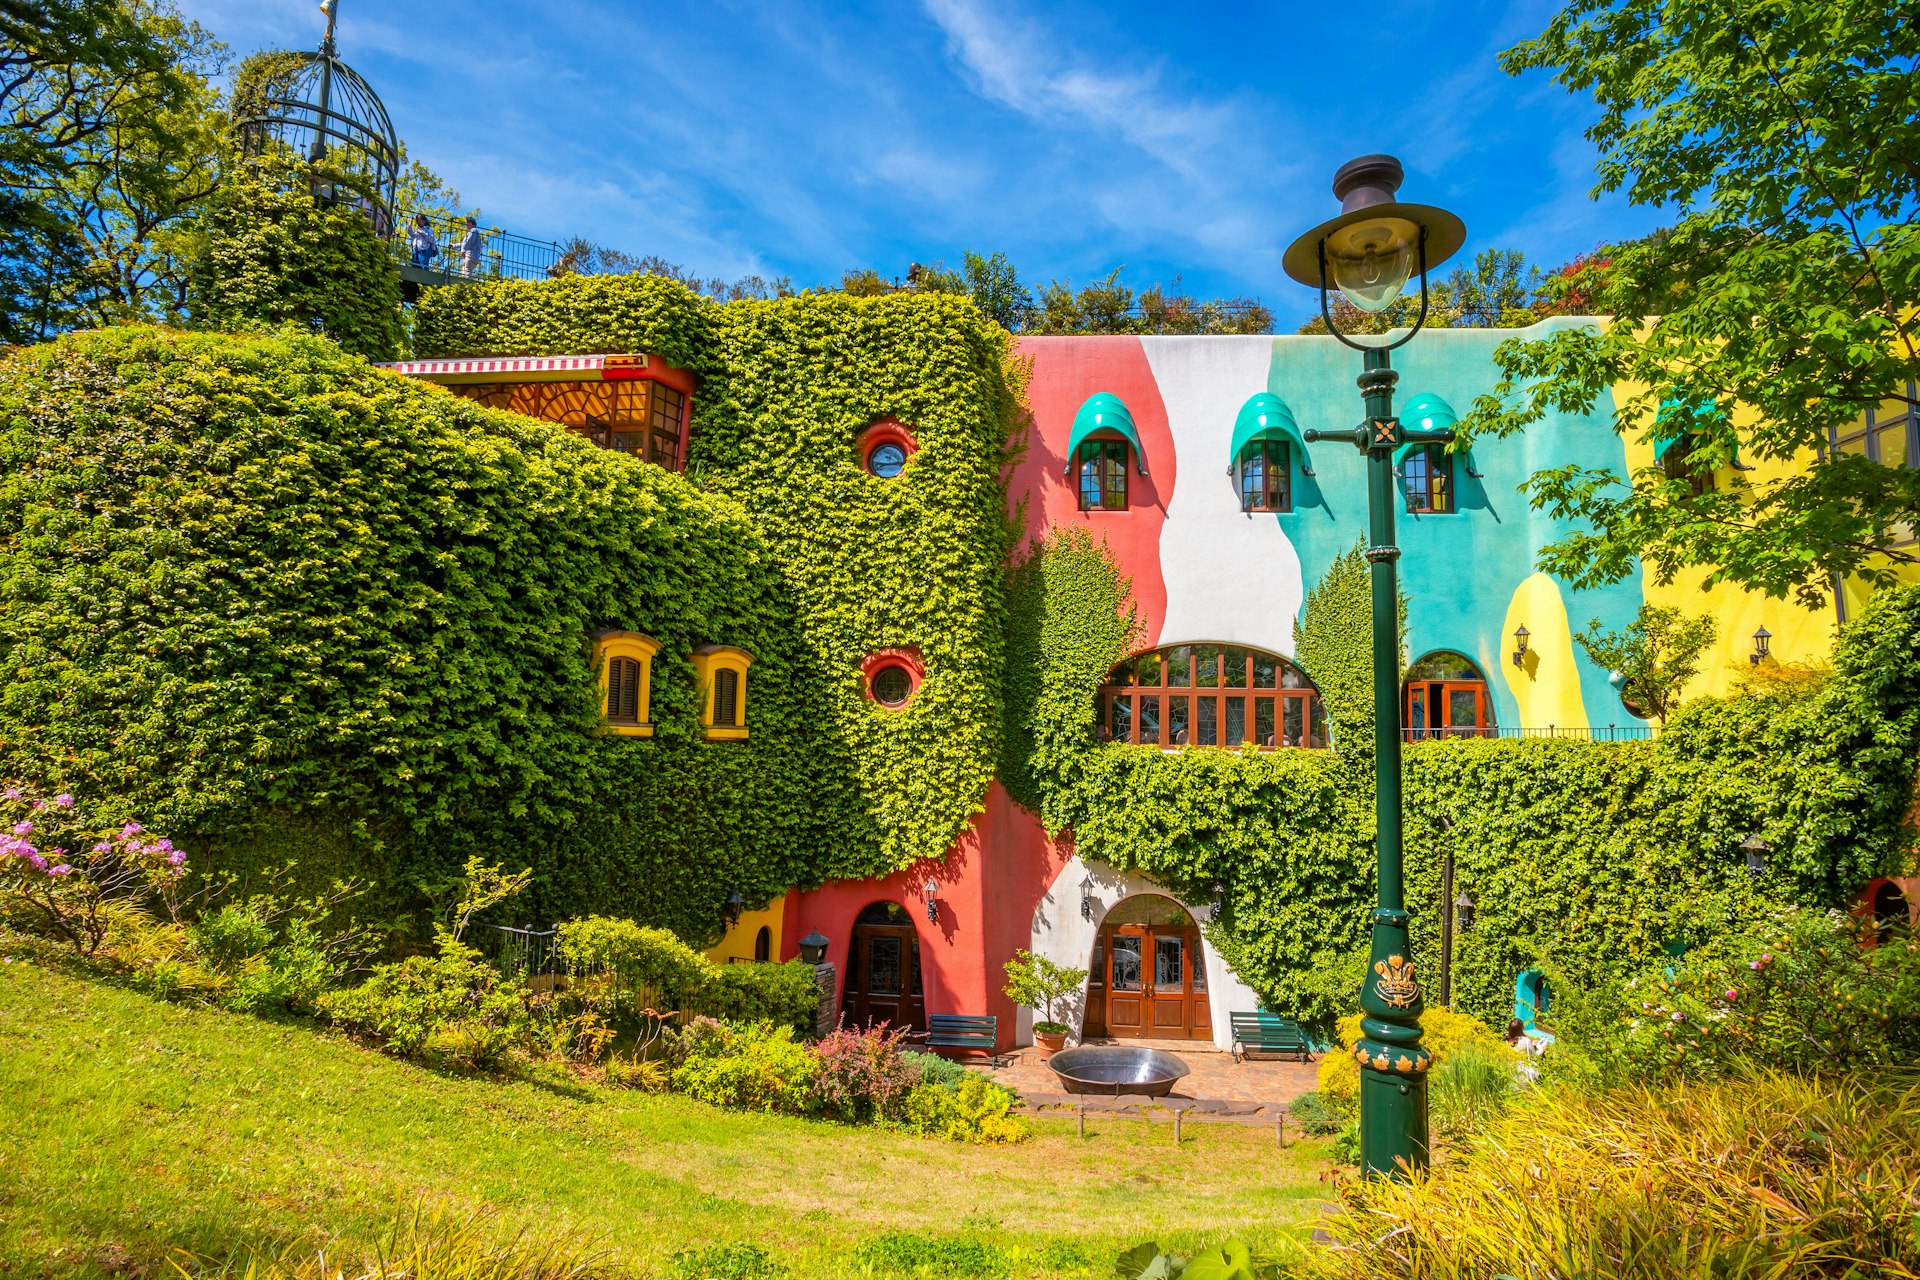 Colourful exterior of the Ghibli museum building